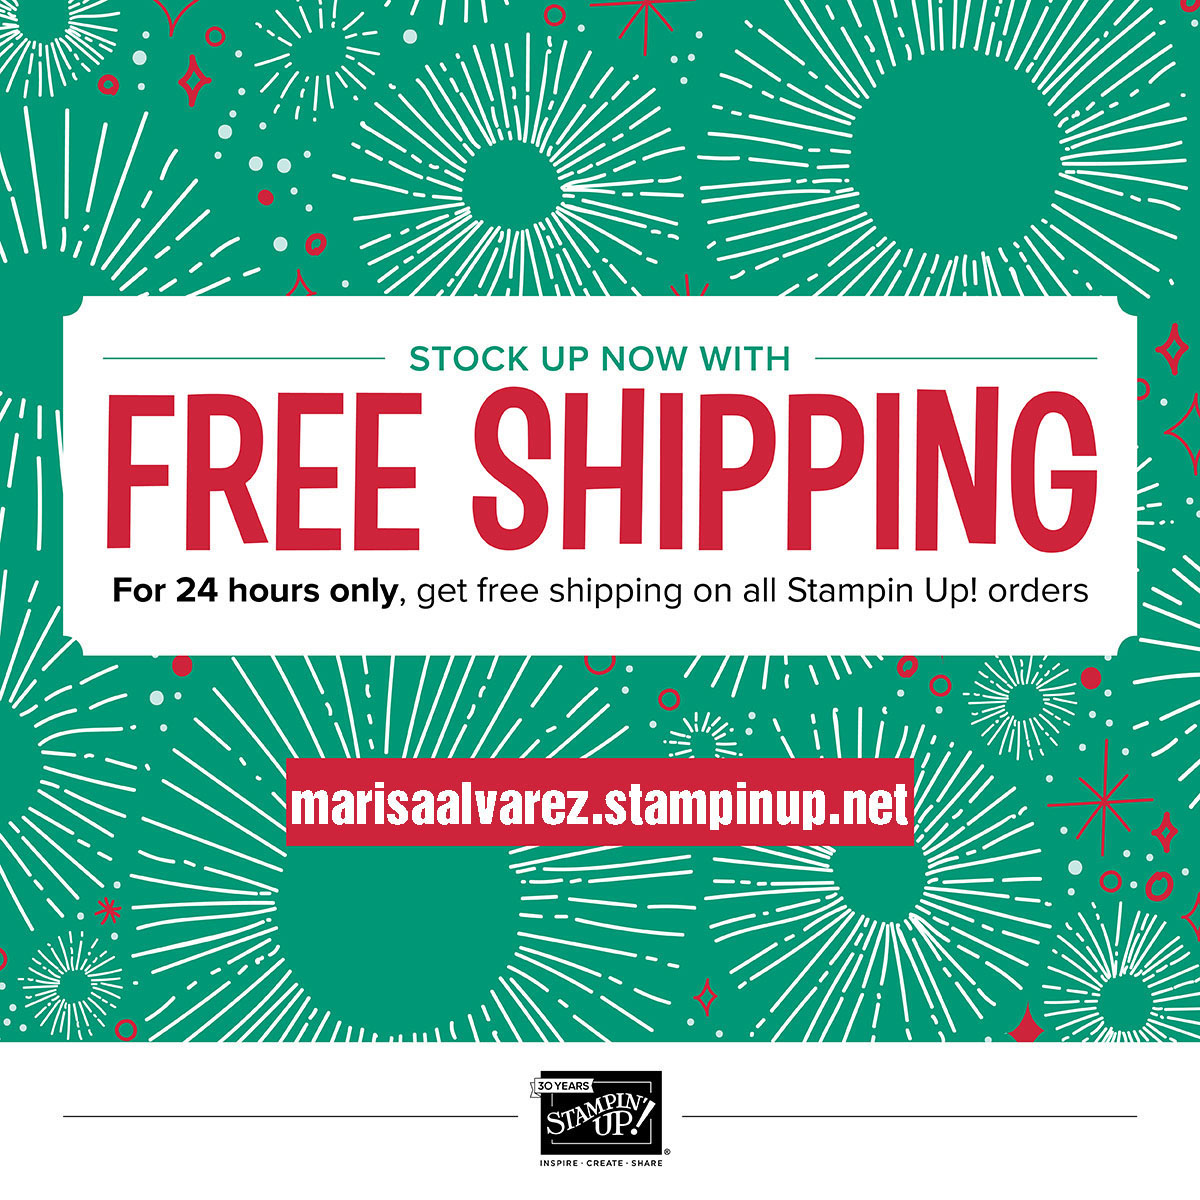 FREE SHIPPING on Stampin' Up! Orders